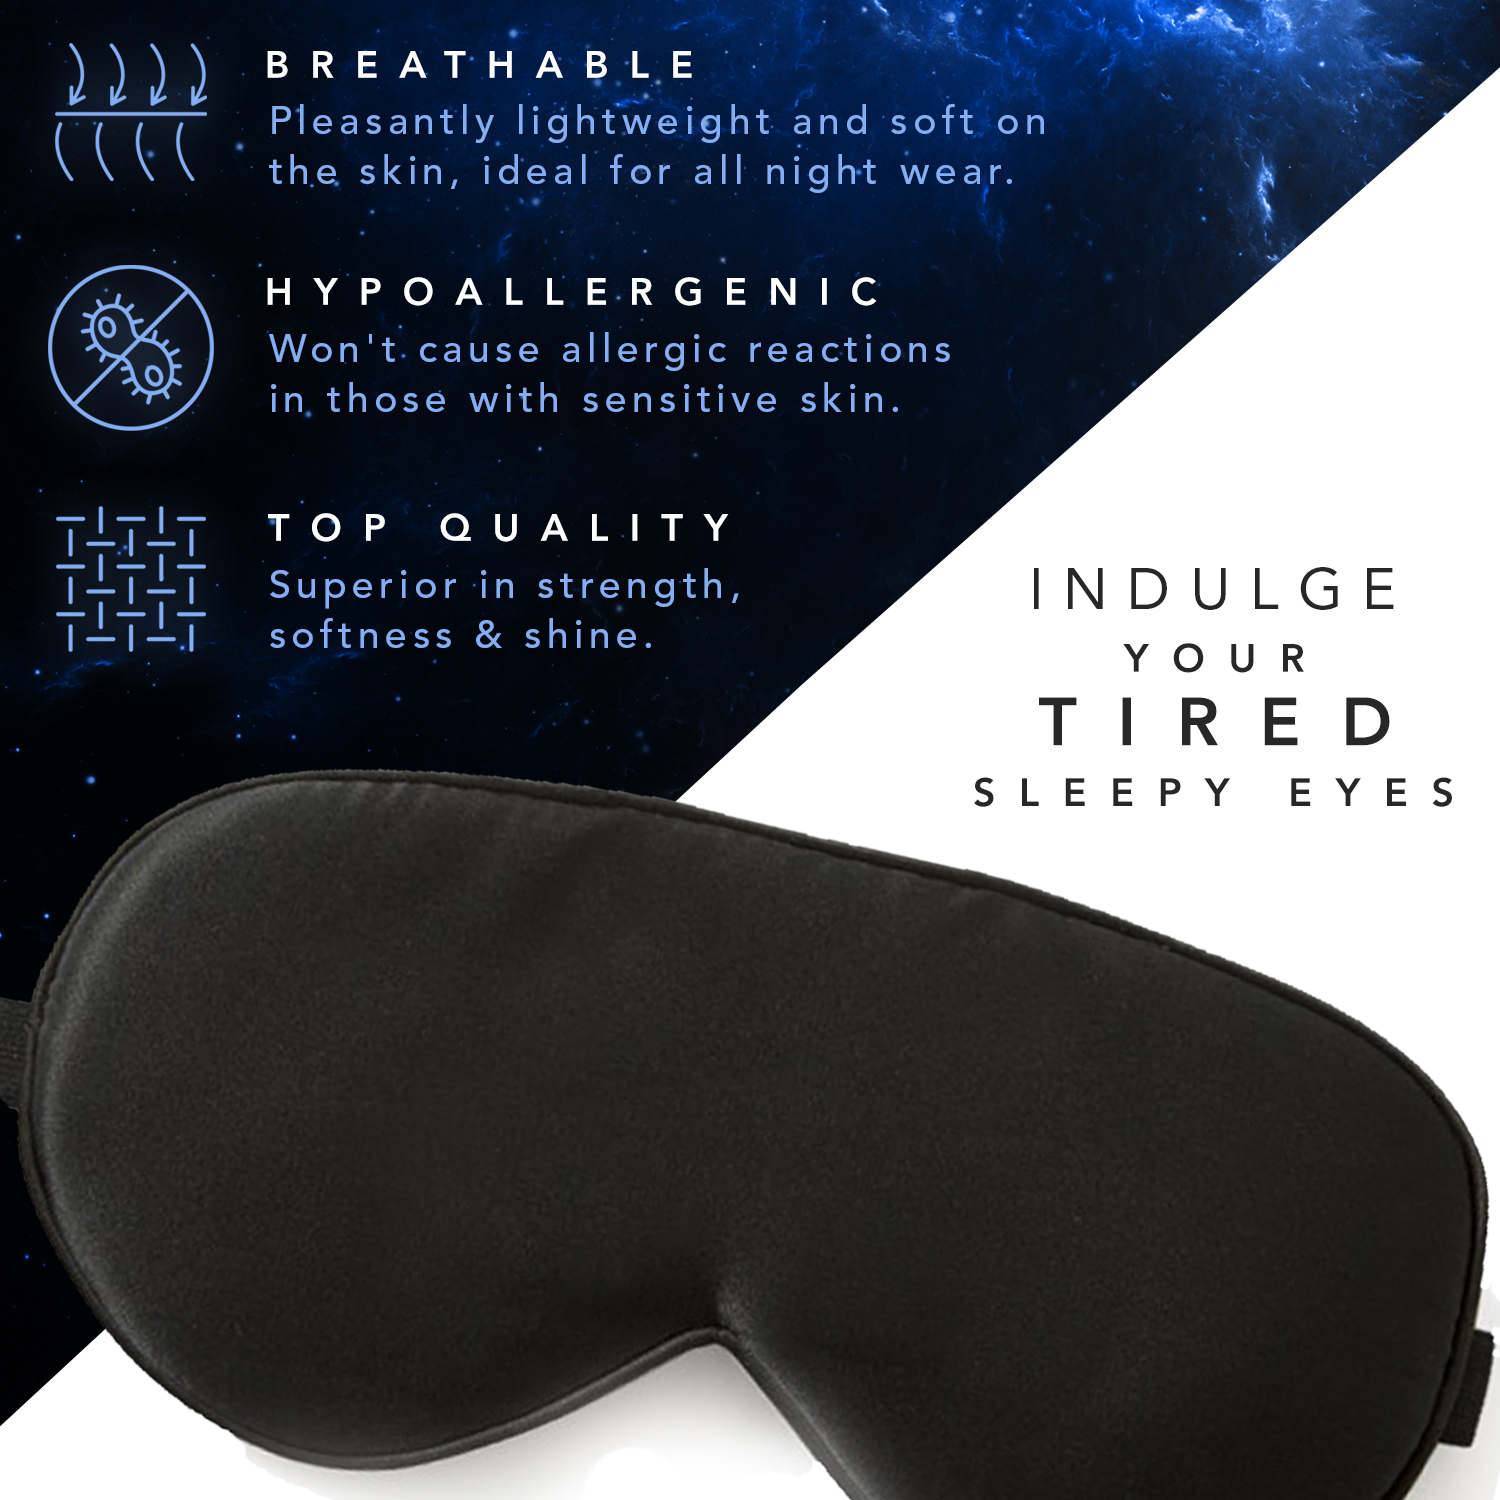 Dream Elements Sleep Mask -- 100% Pure Mulberry Silk Eye Mask - with Foam Ear Plugs & Anti Snoring Nose Clip - For Men & Women - Great for Travel - Hypoallergenic Mask - image 5 of 6